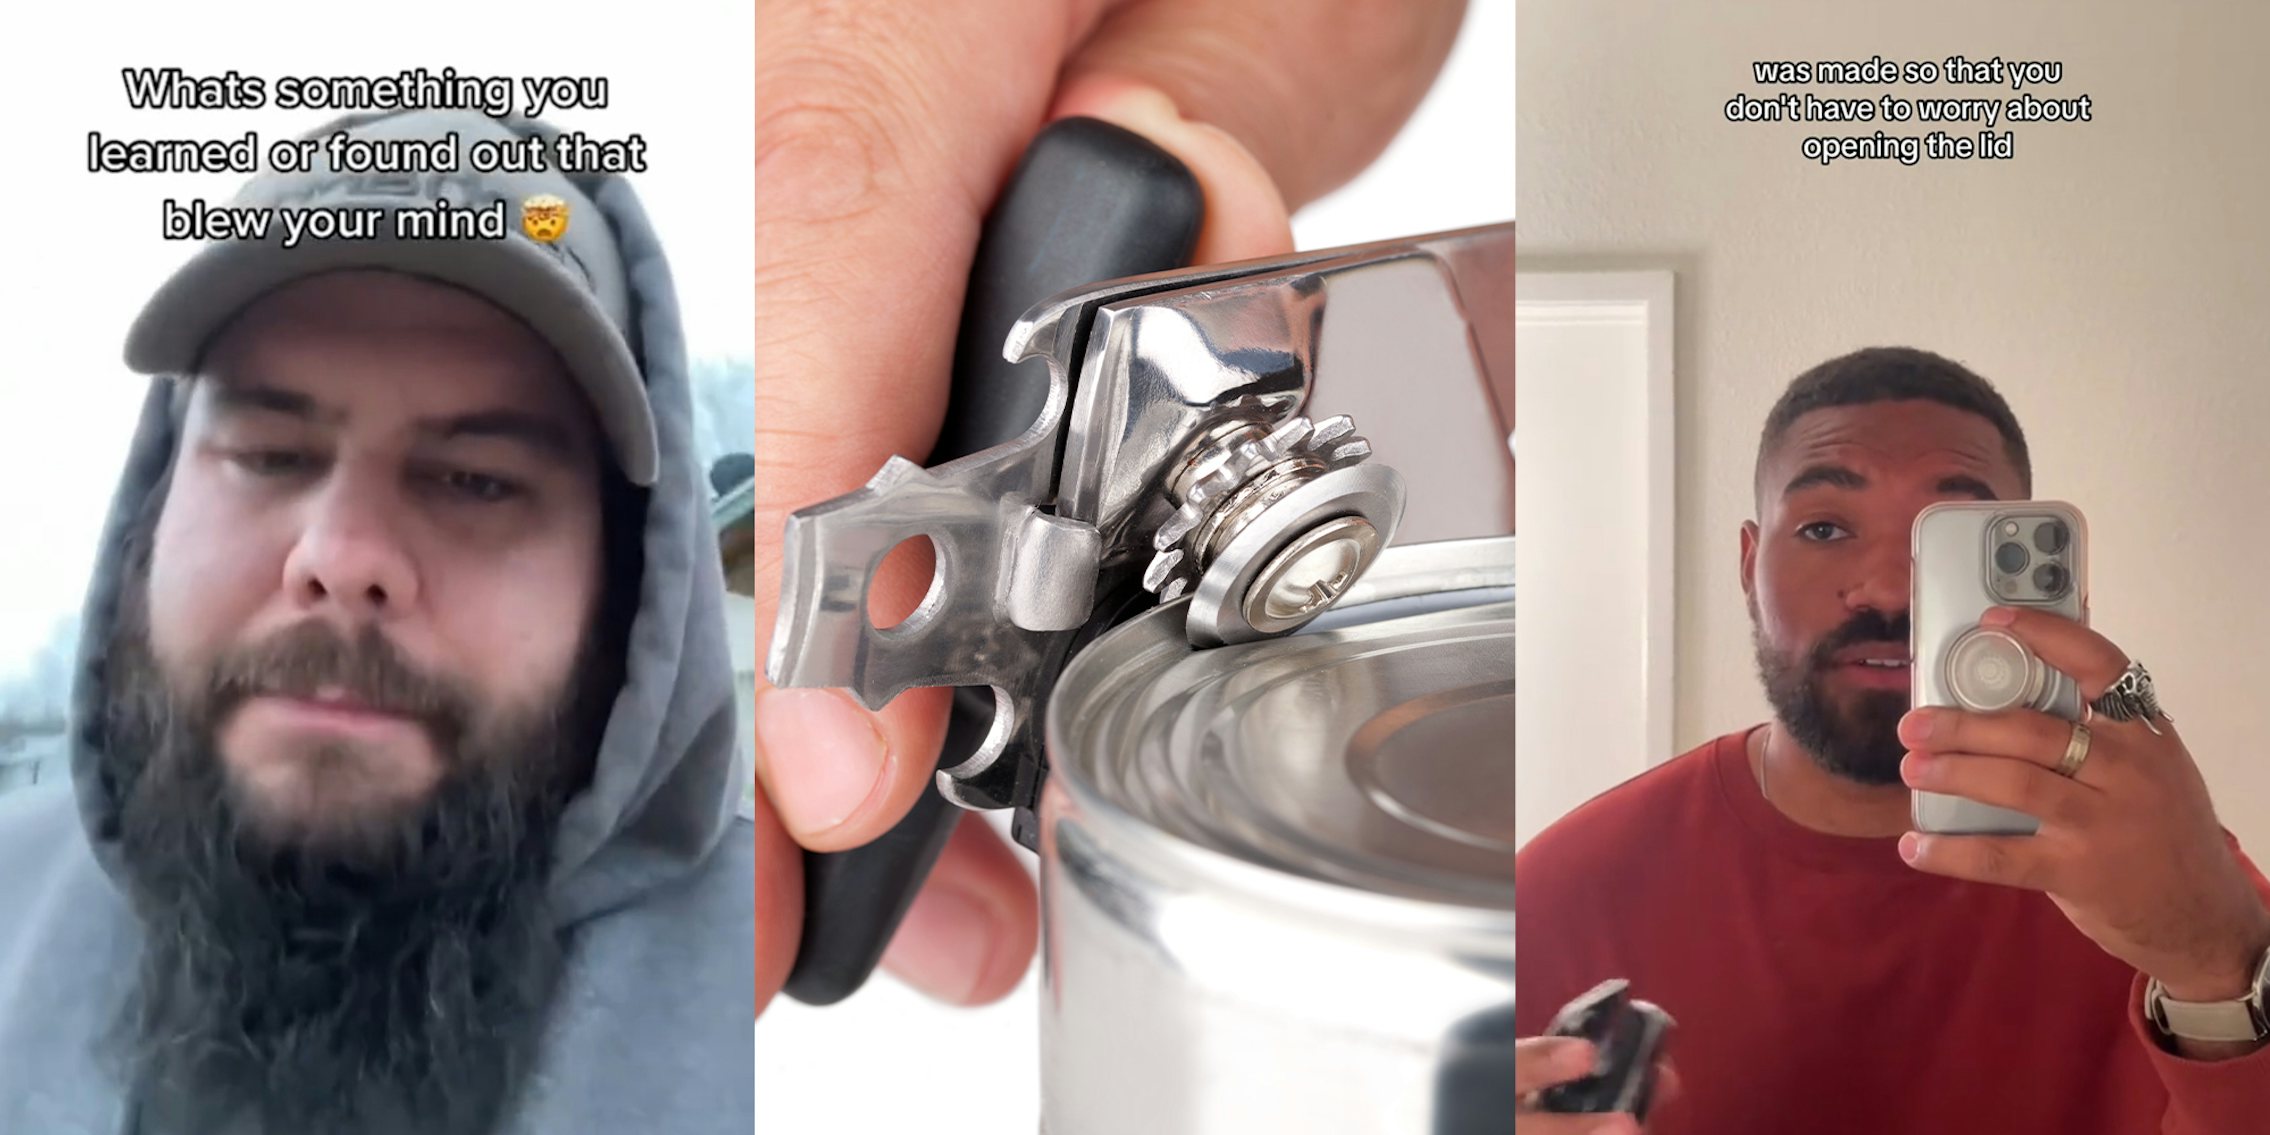 Man shares right way to use can opener